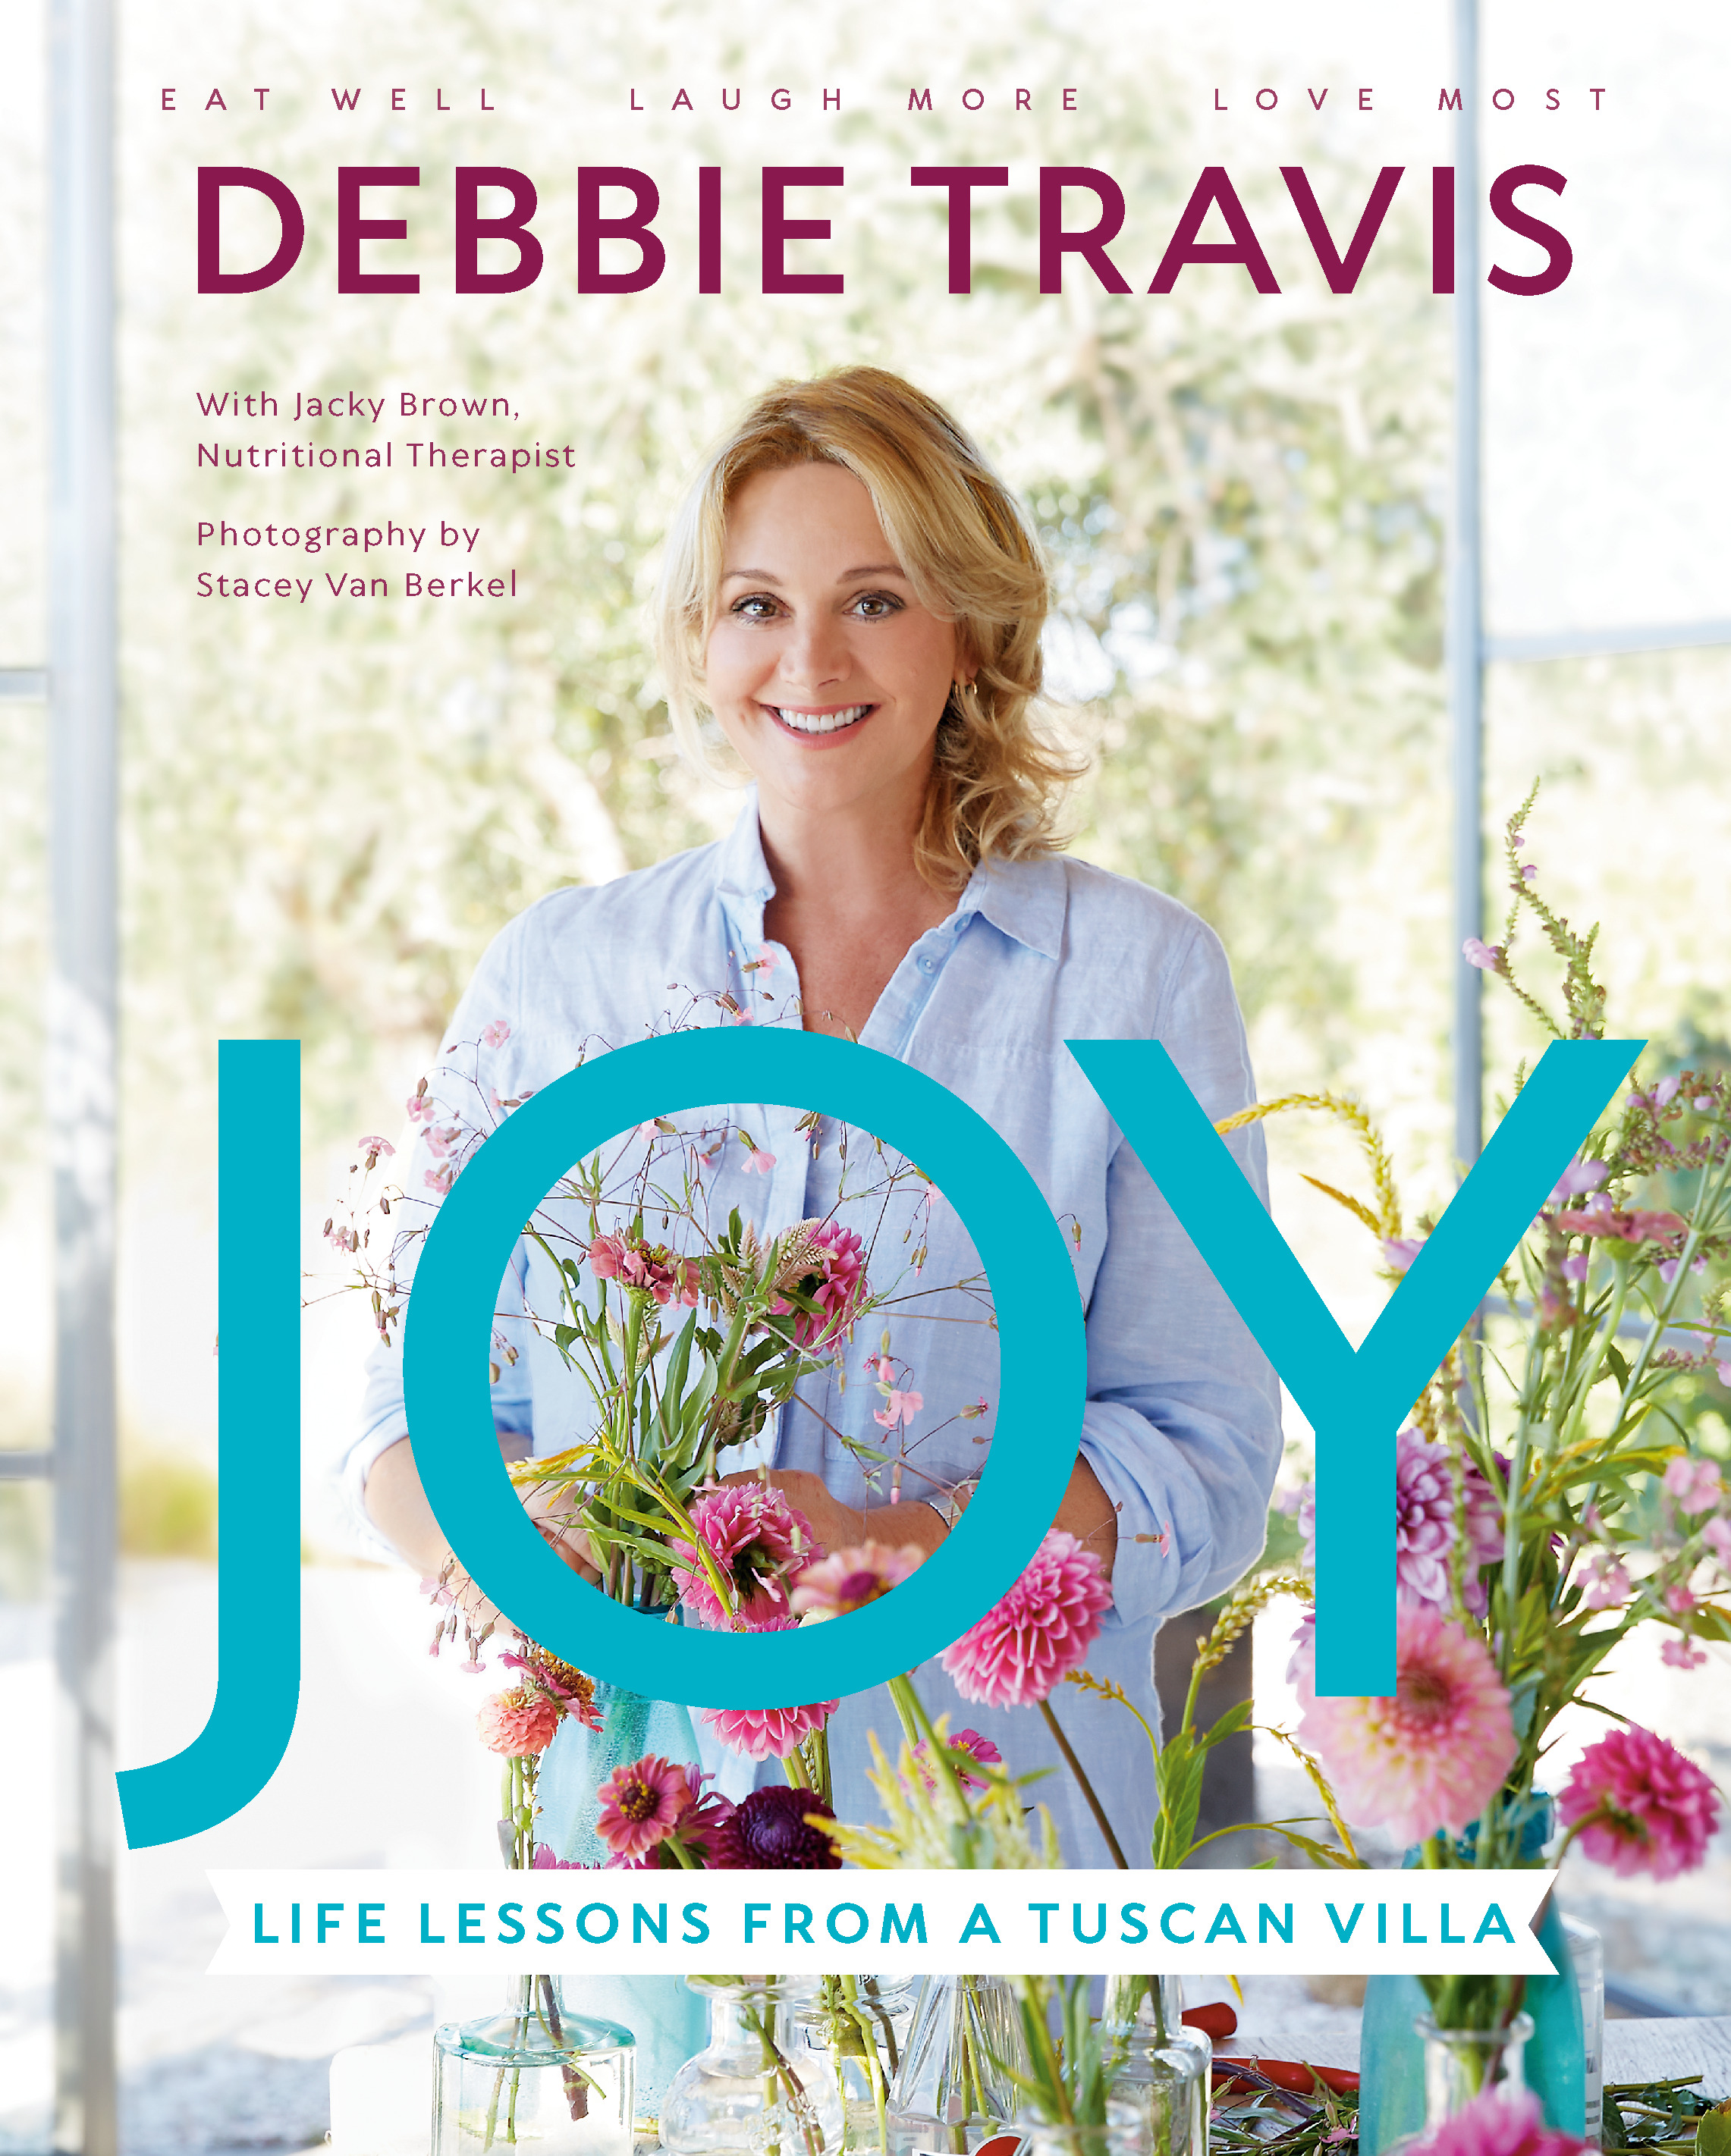 Joy : Life Lessons from a Tuscan Villa | Travis, Debbie